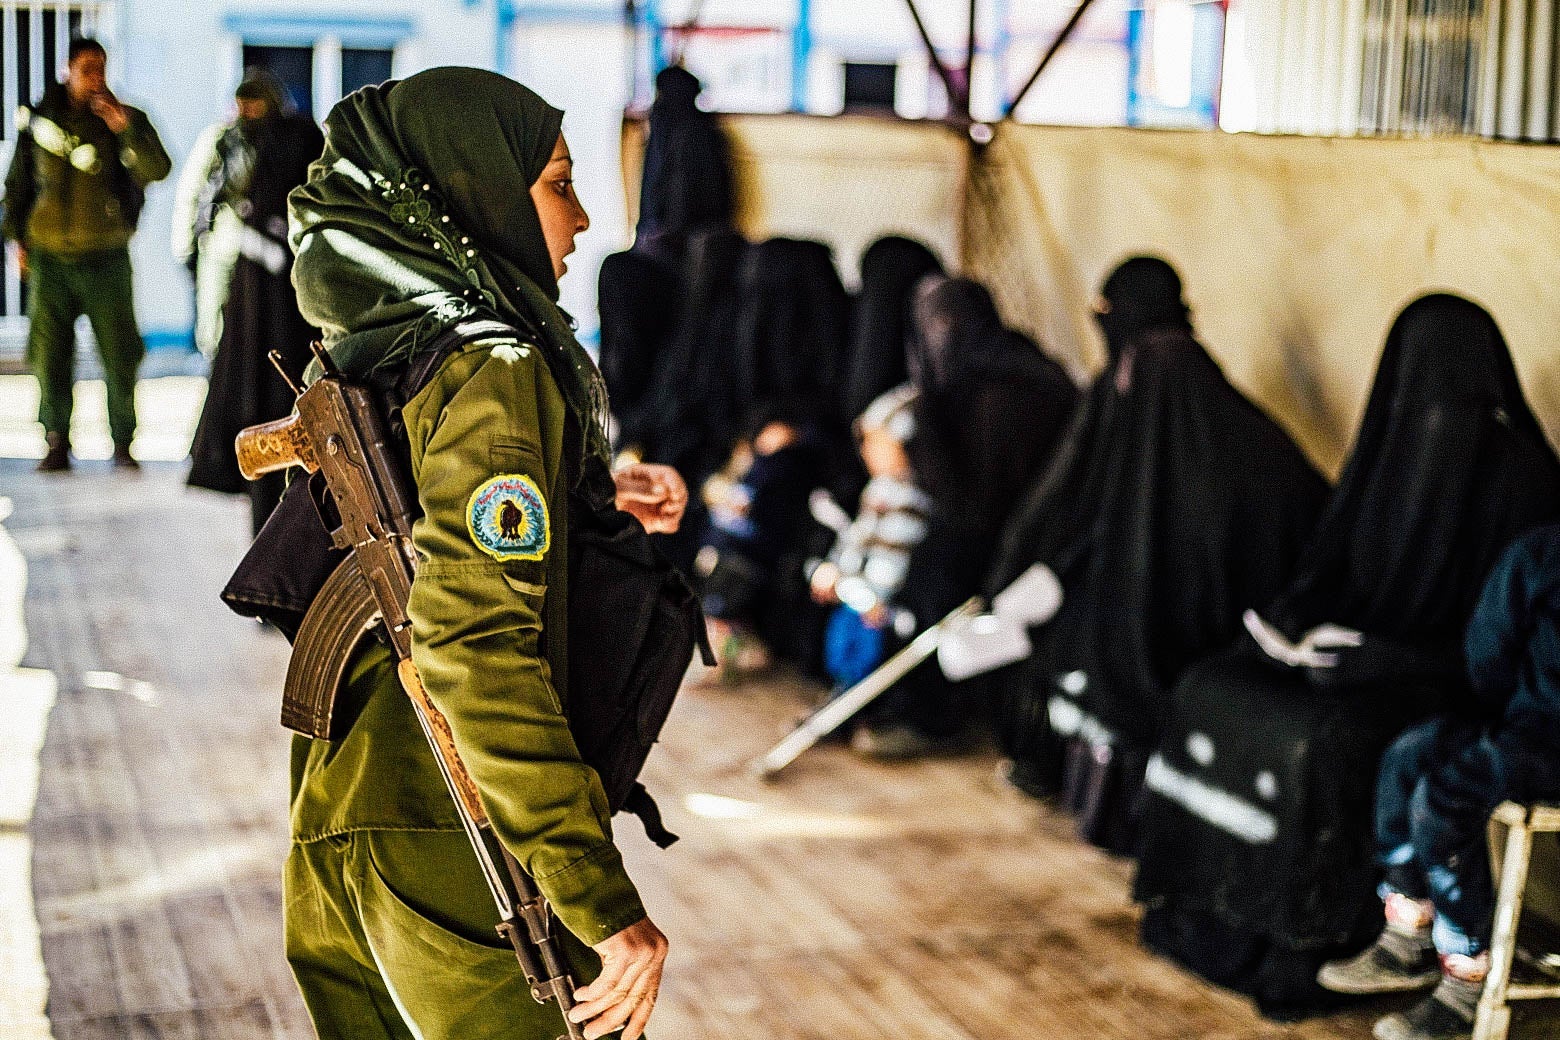 A female Kurdish fighter in uniform faces a row of women seated, wearing black veils.